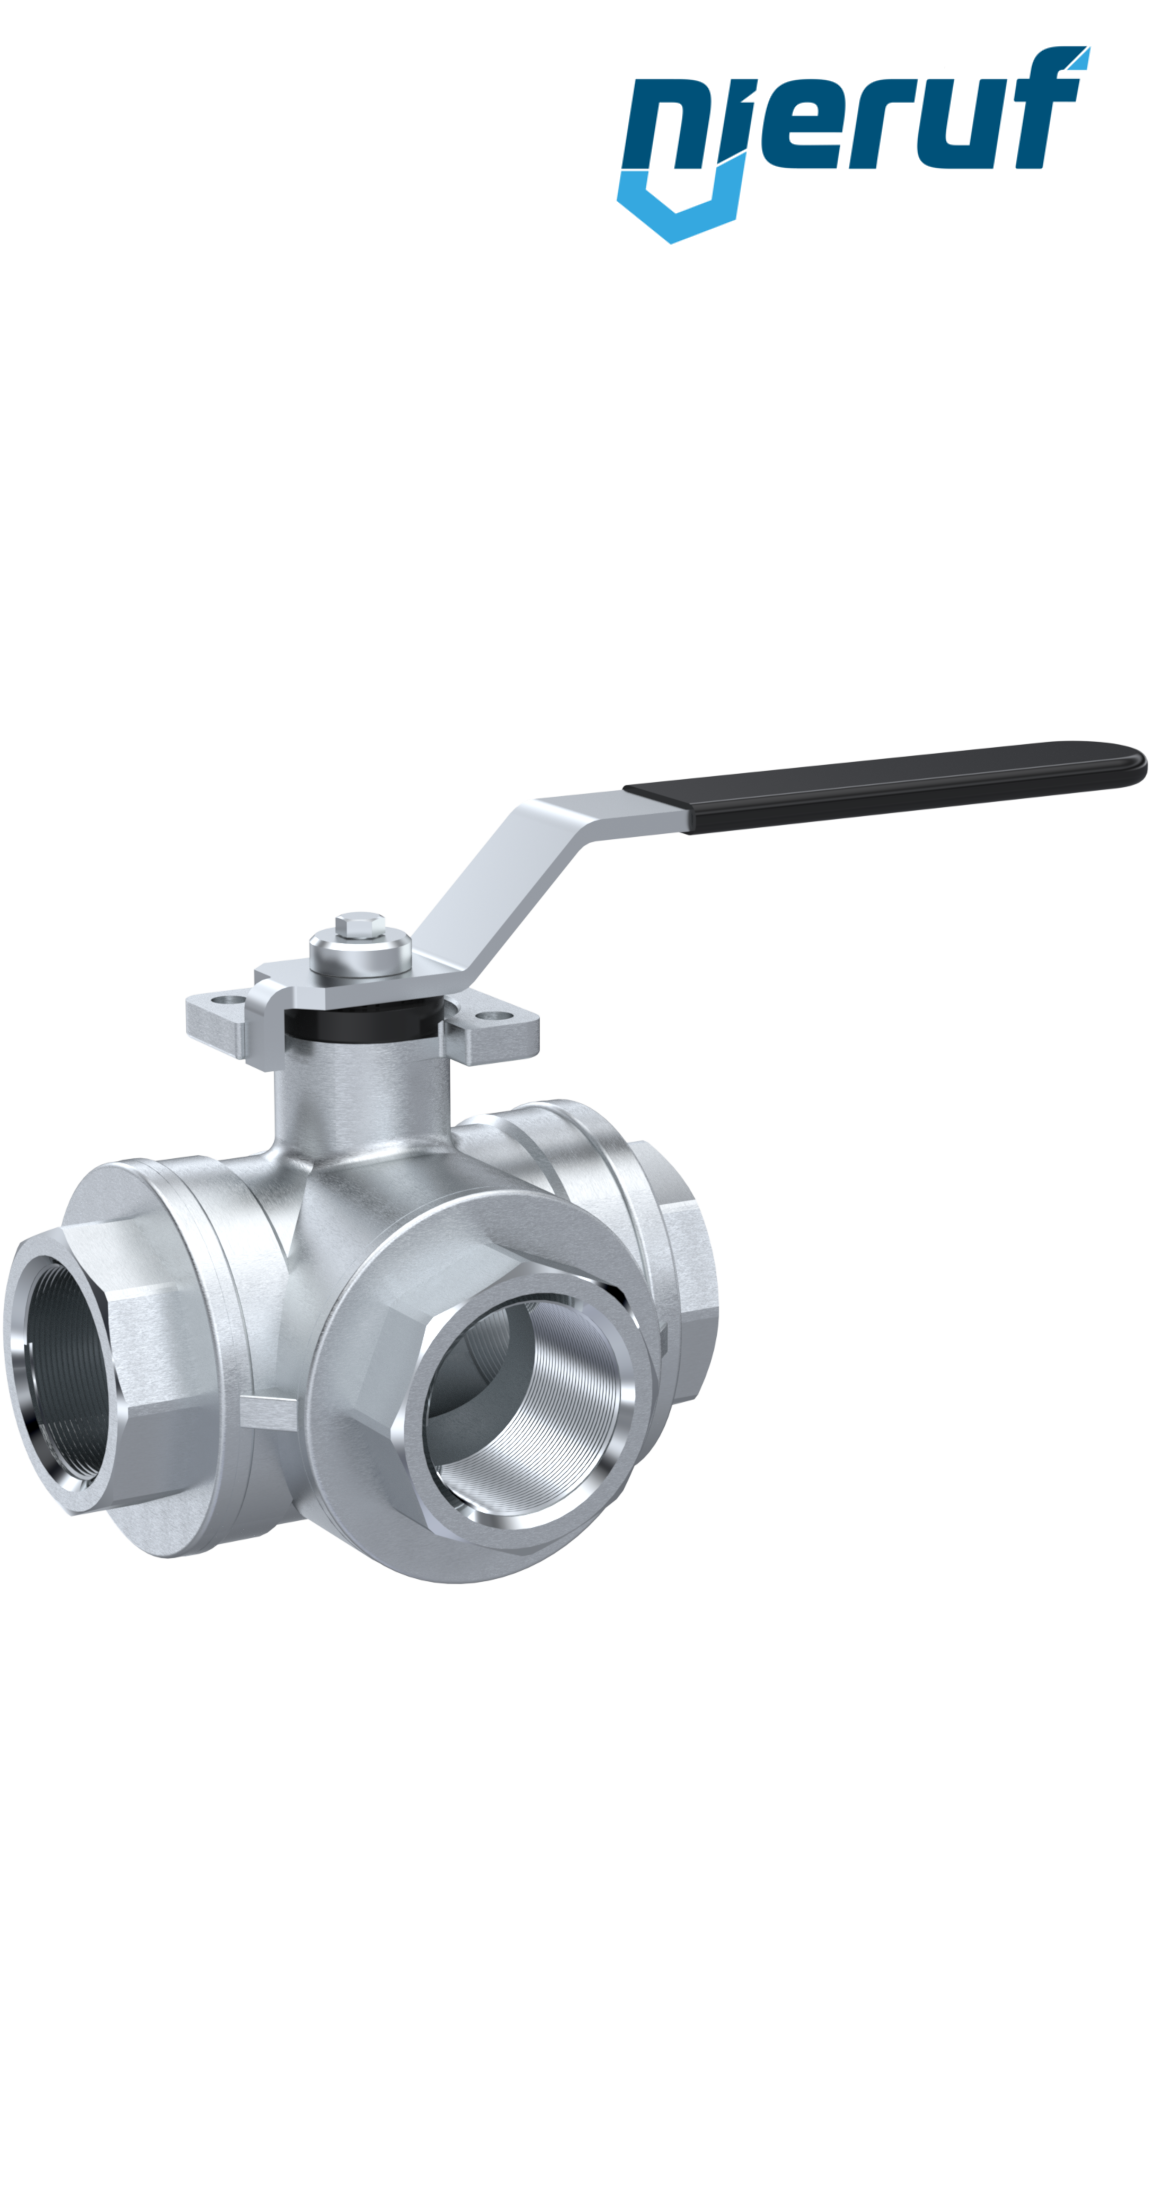 3  way brass ball valve DN50 - 2" inch GK08 full port design with T drilling